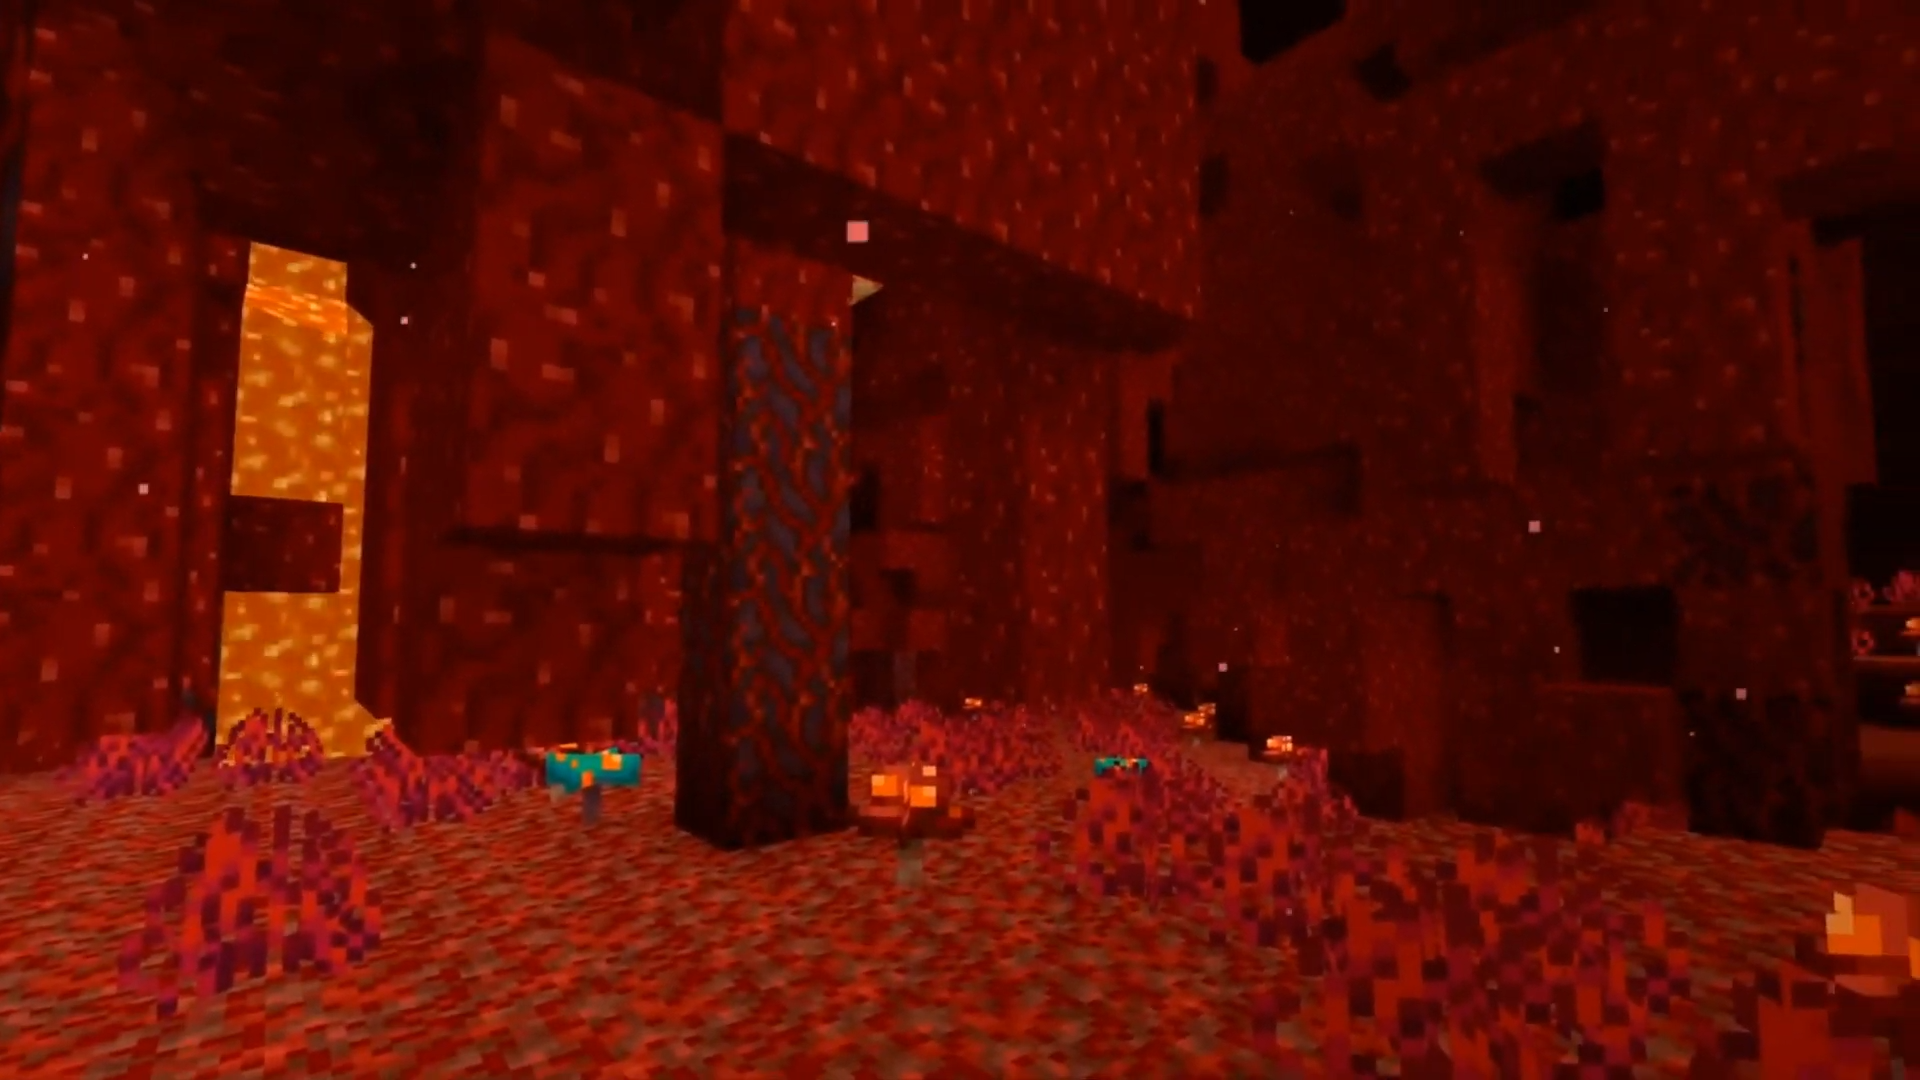 Minecraft 1.16 Update Brings Materials To The Nether With Netherite And A New Biome #Minecraft, #Mojang, #PCMAC, #XboxGameStudios. Minecraft Biomes, Minecraft